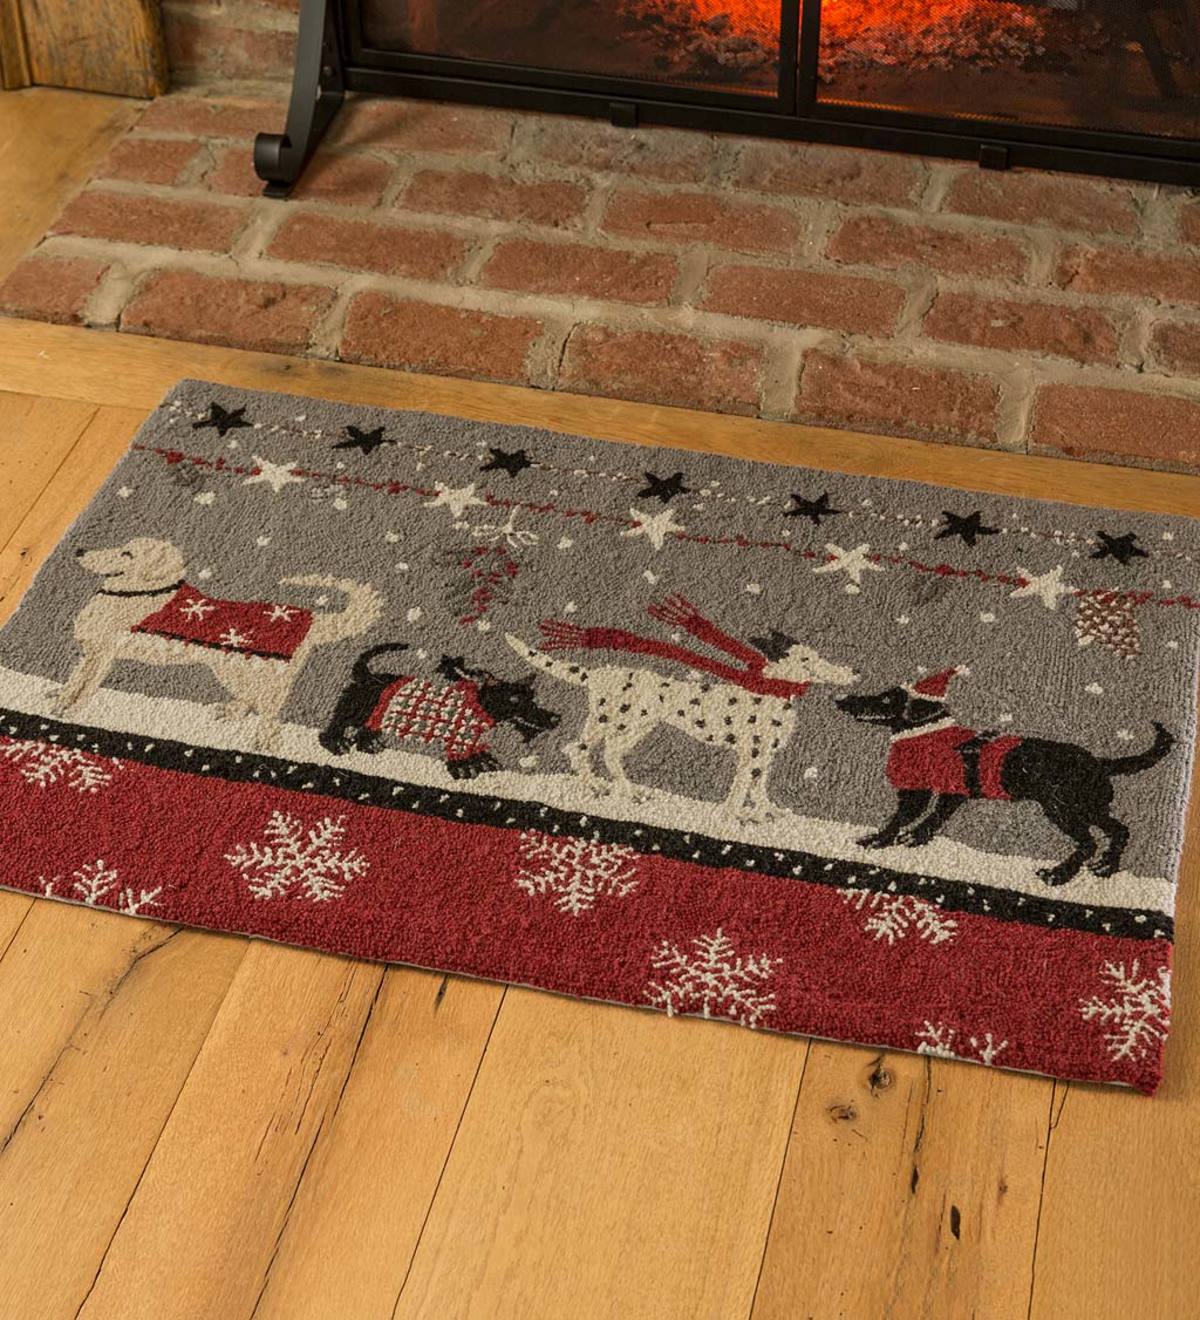 Hand-Hooked Wool Christmas Doggies Snow Day Accent Rug